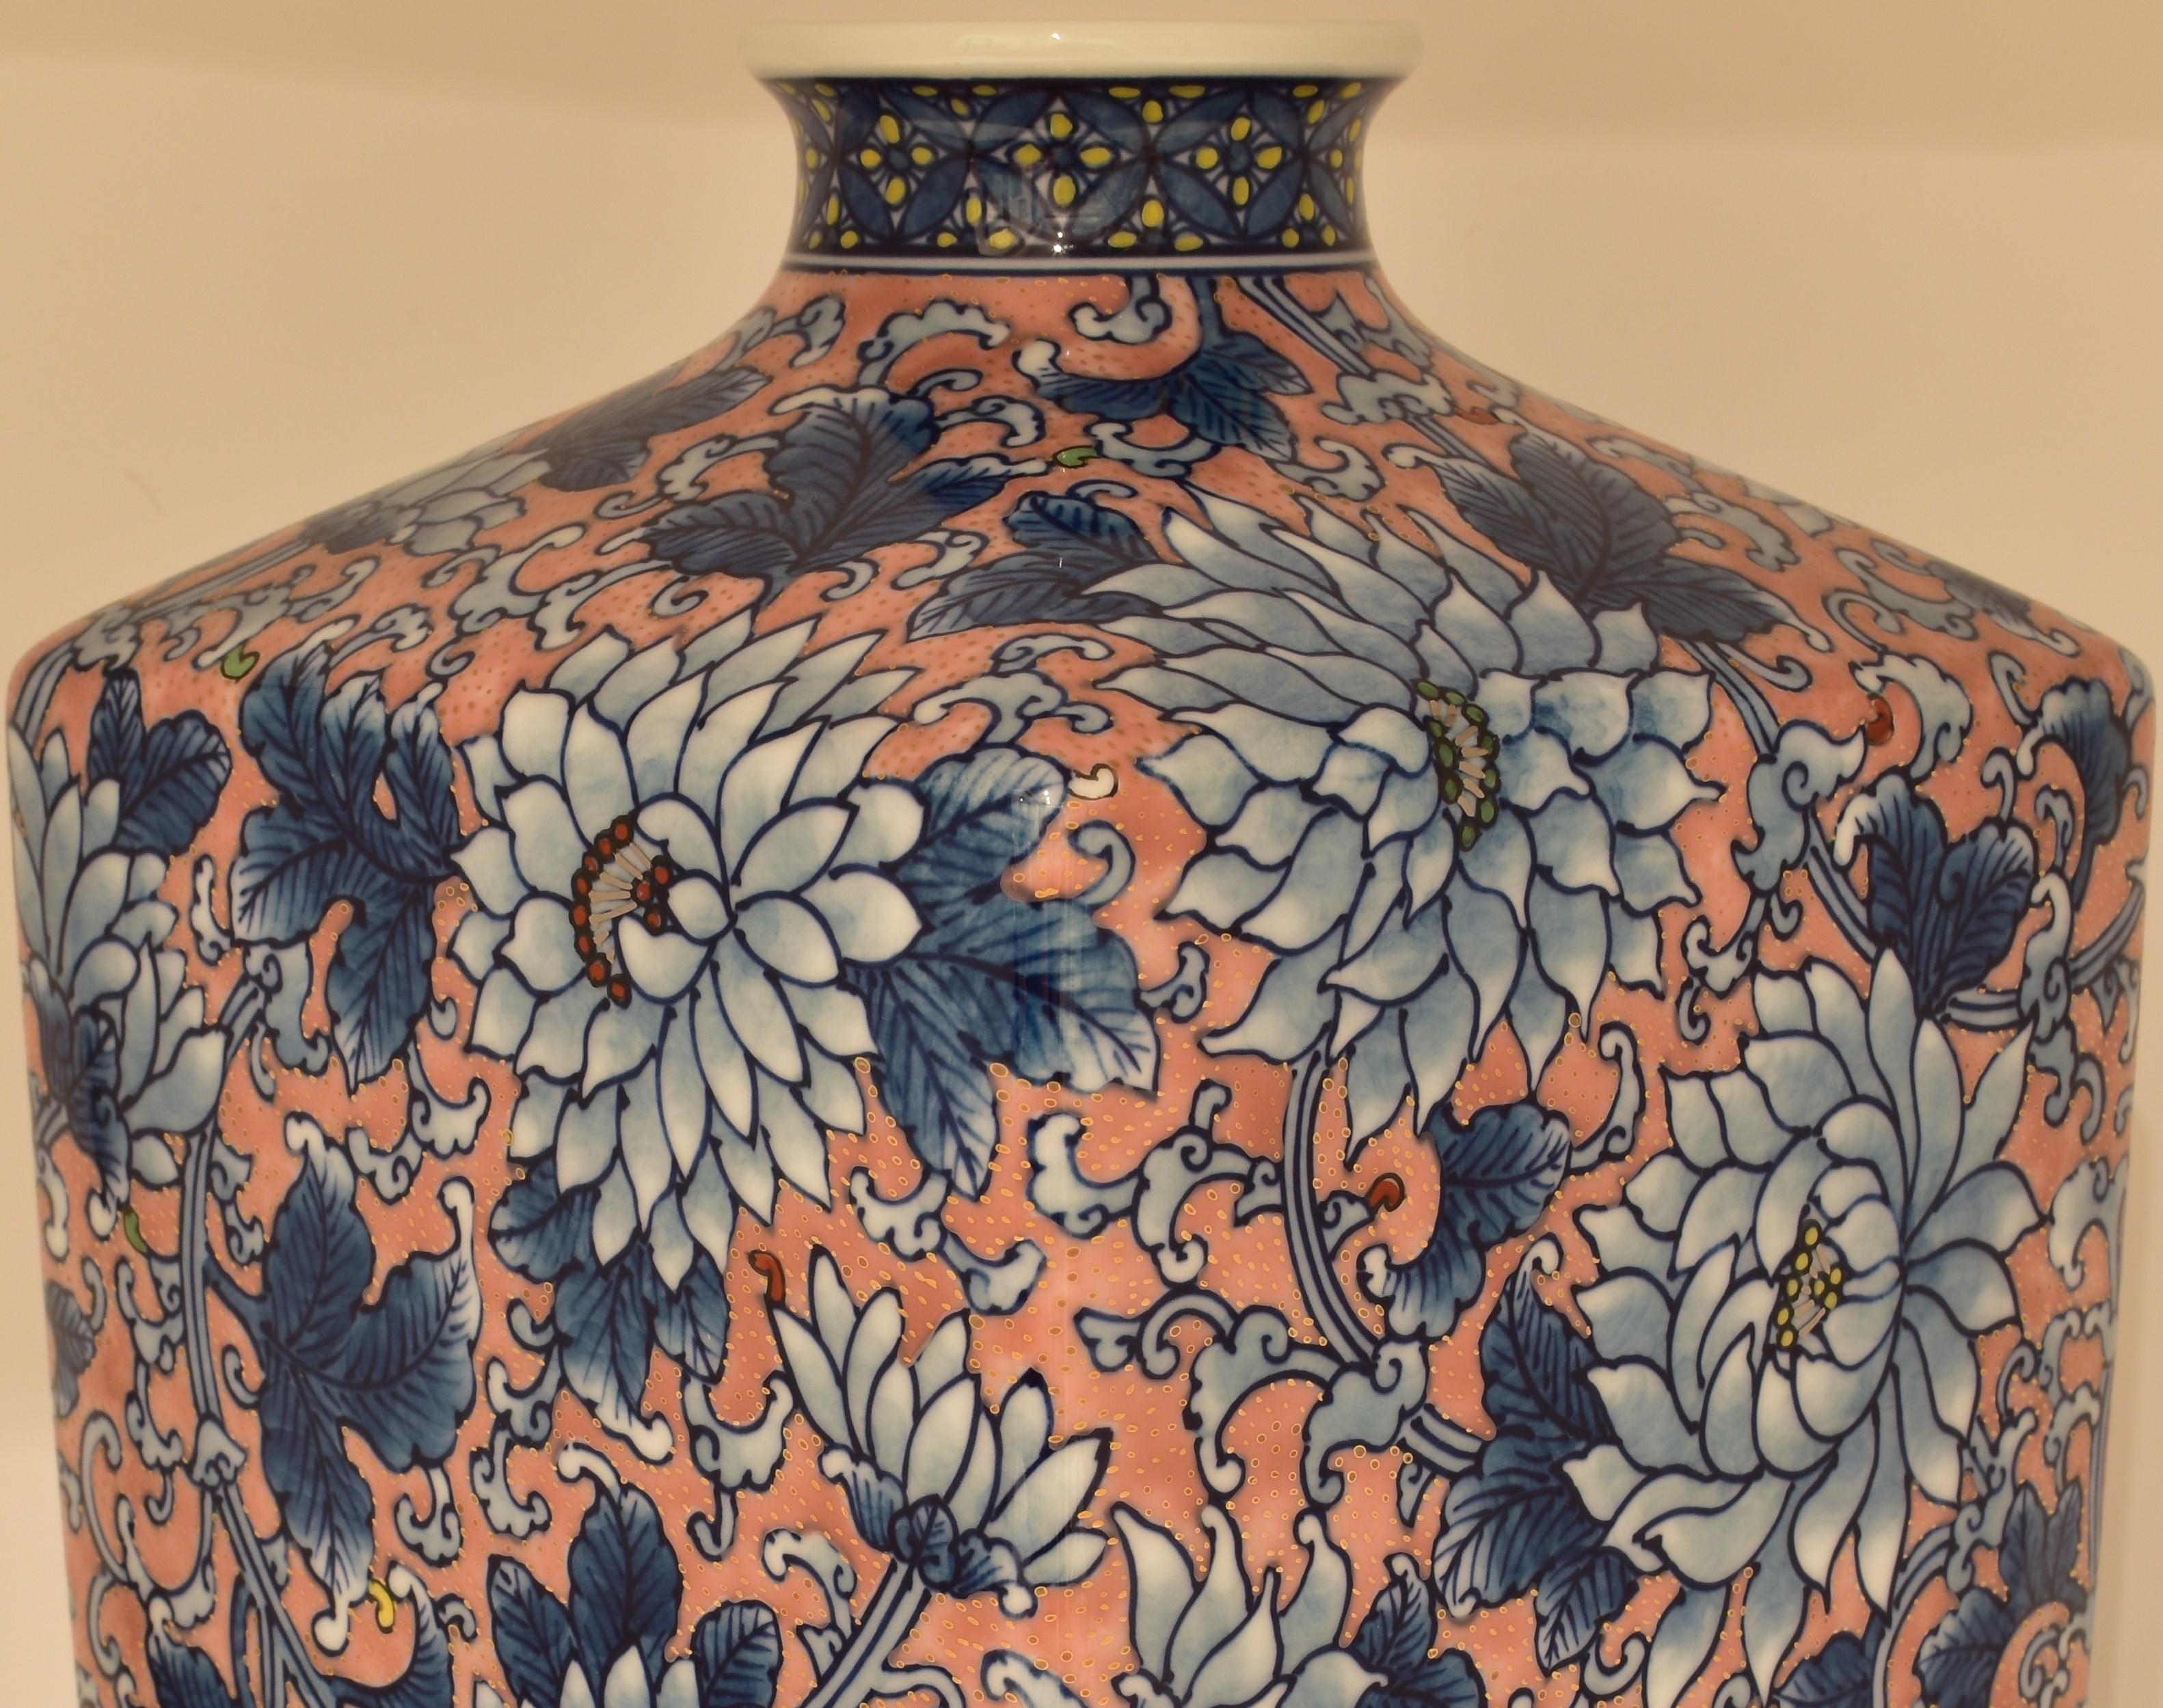 Extraordinary Japanese contemporary museum-quality decorative vase, a masterpiece intricately hand-painted on a rectangular body of the finest Arita porcelain, which provides the perfect canvas for a subtly gilded field of chrysanthemums in full